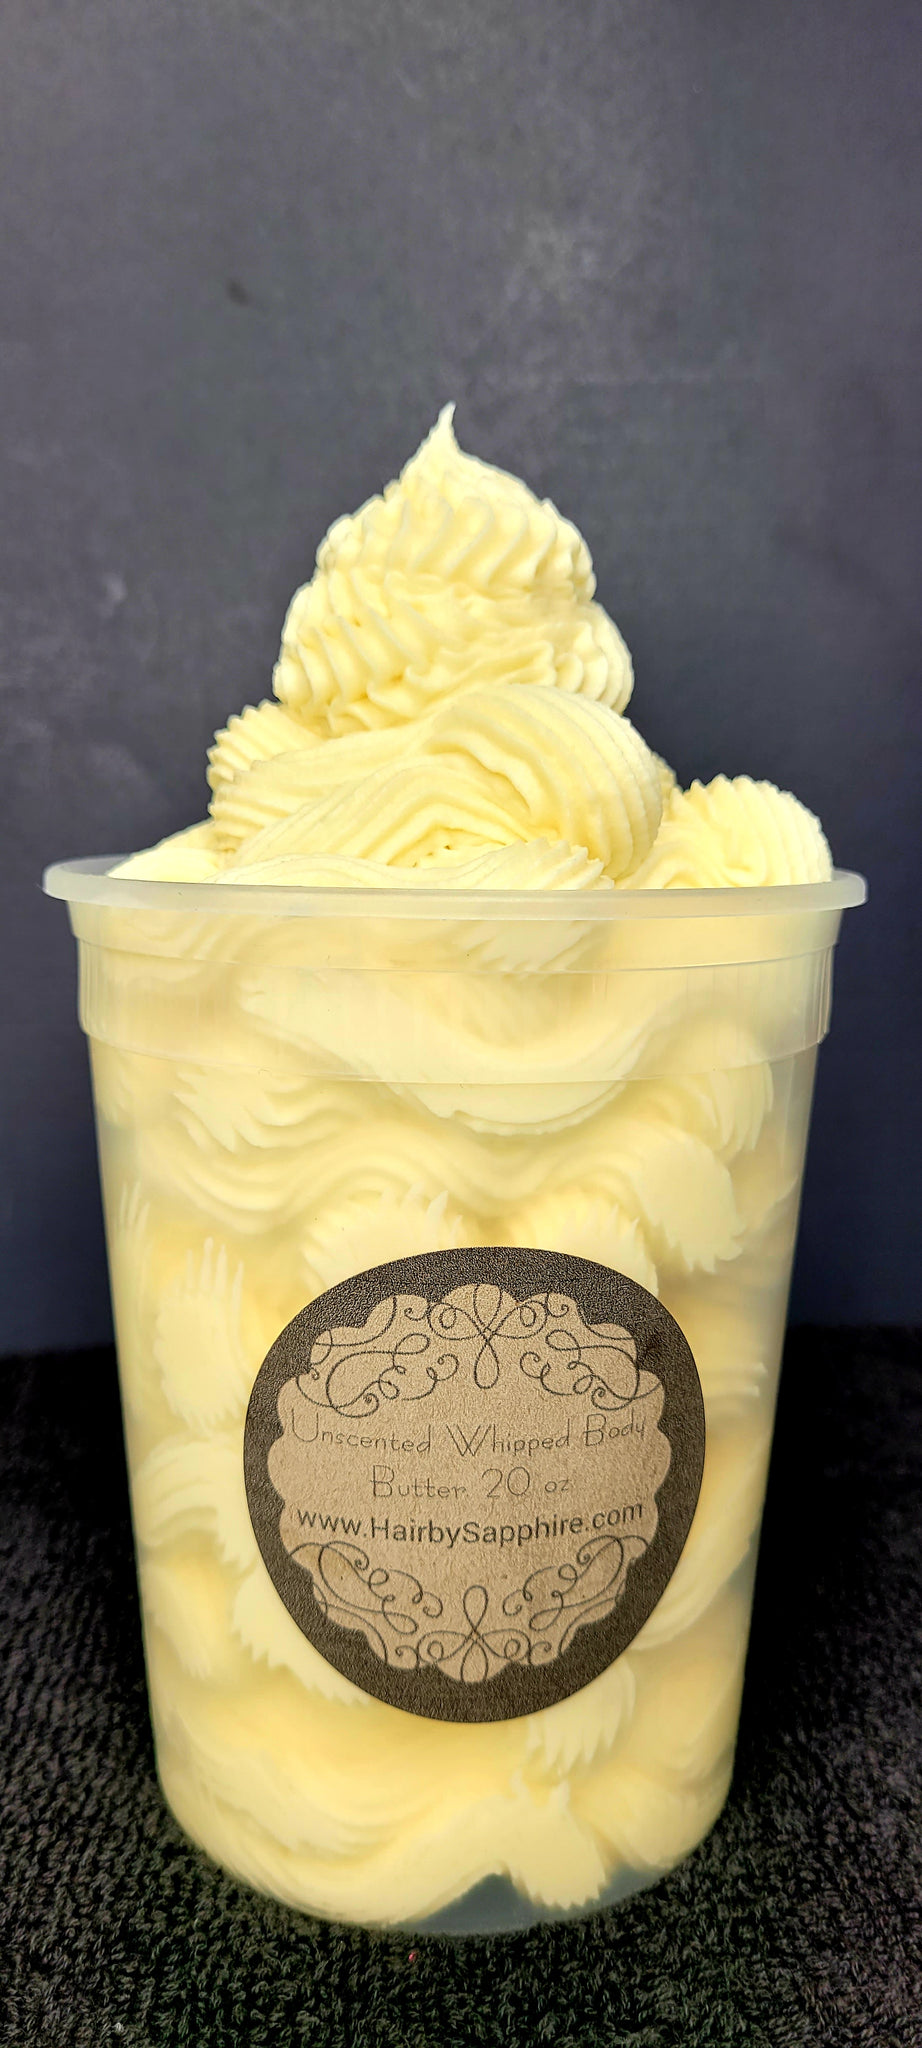 20 oz Unscented Raw Whipped Shea Body Butter Cream 